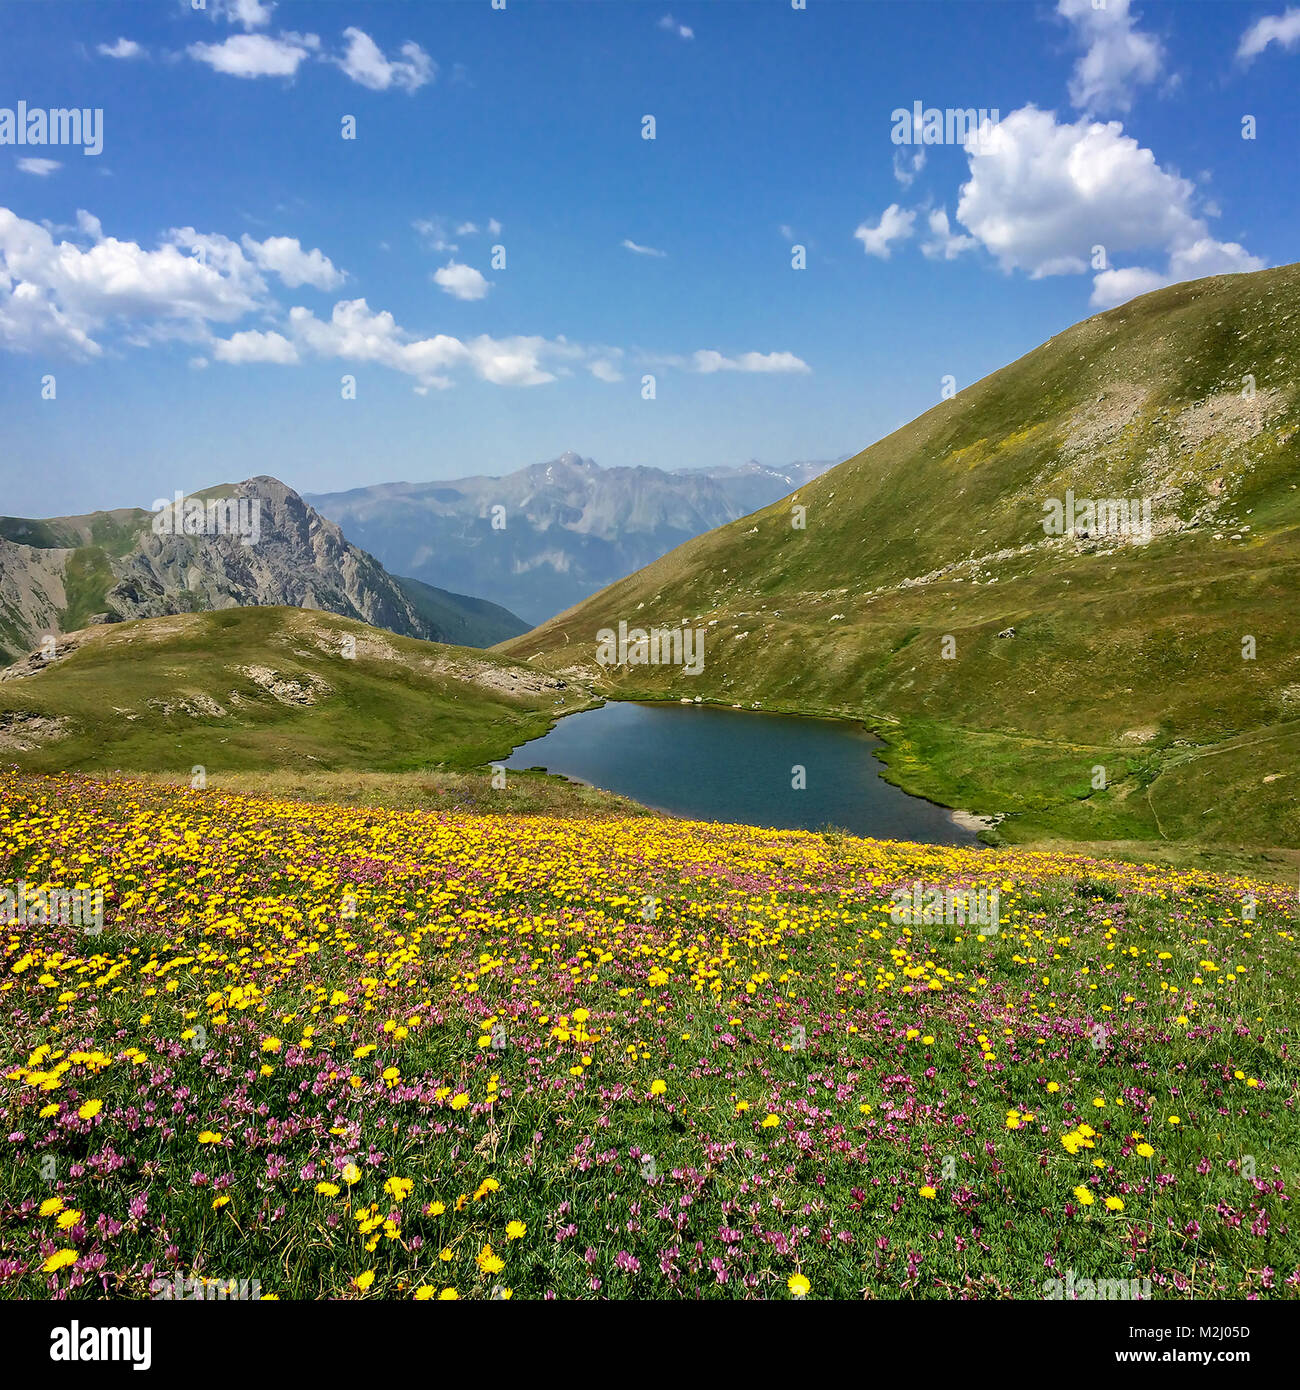 Neal lake with flowers in the foreground, Queyras, the Alps, France Stock Photo